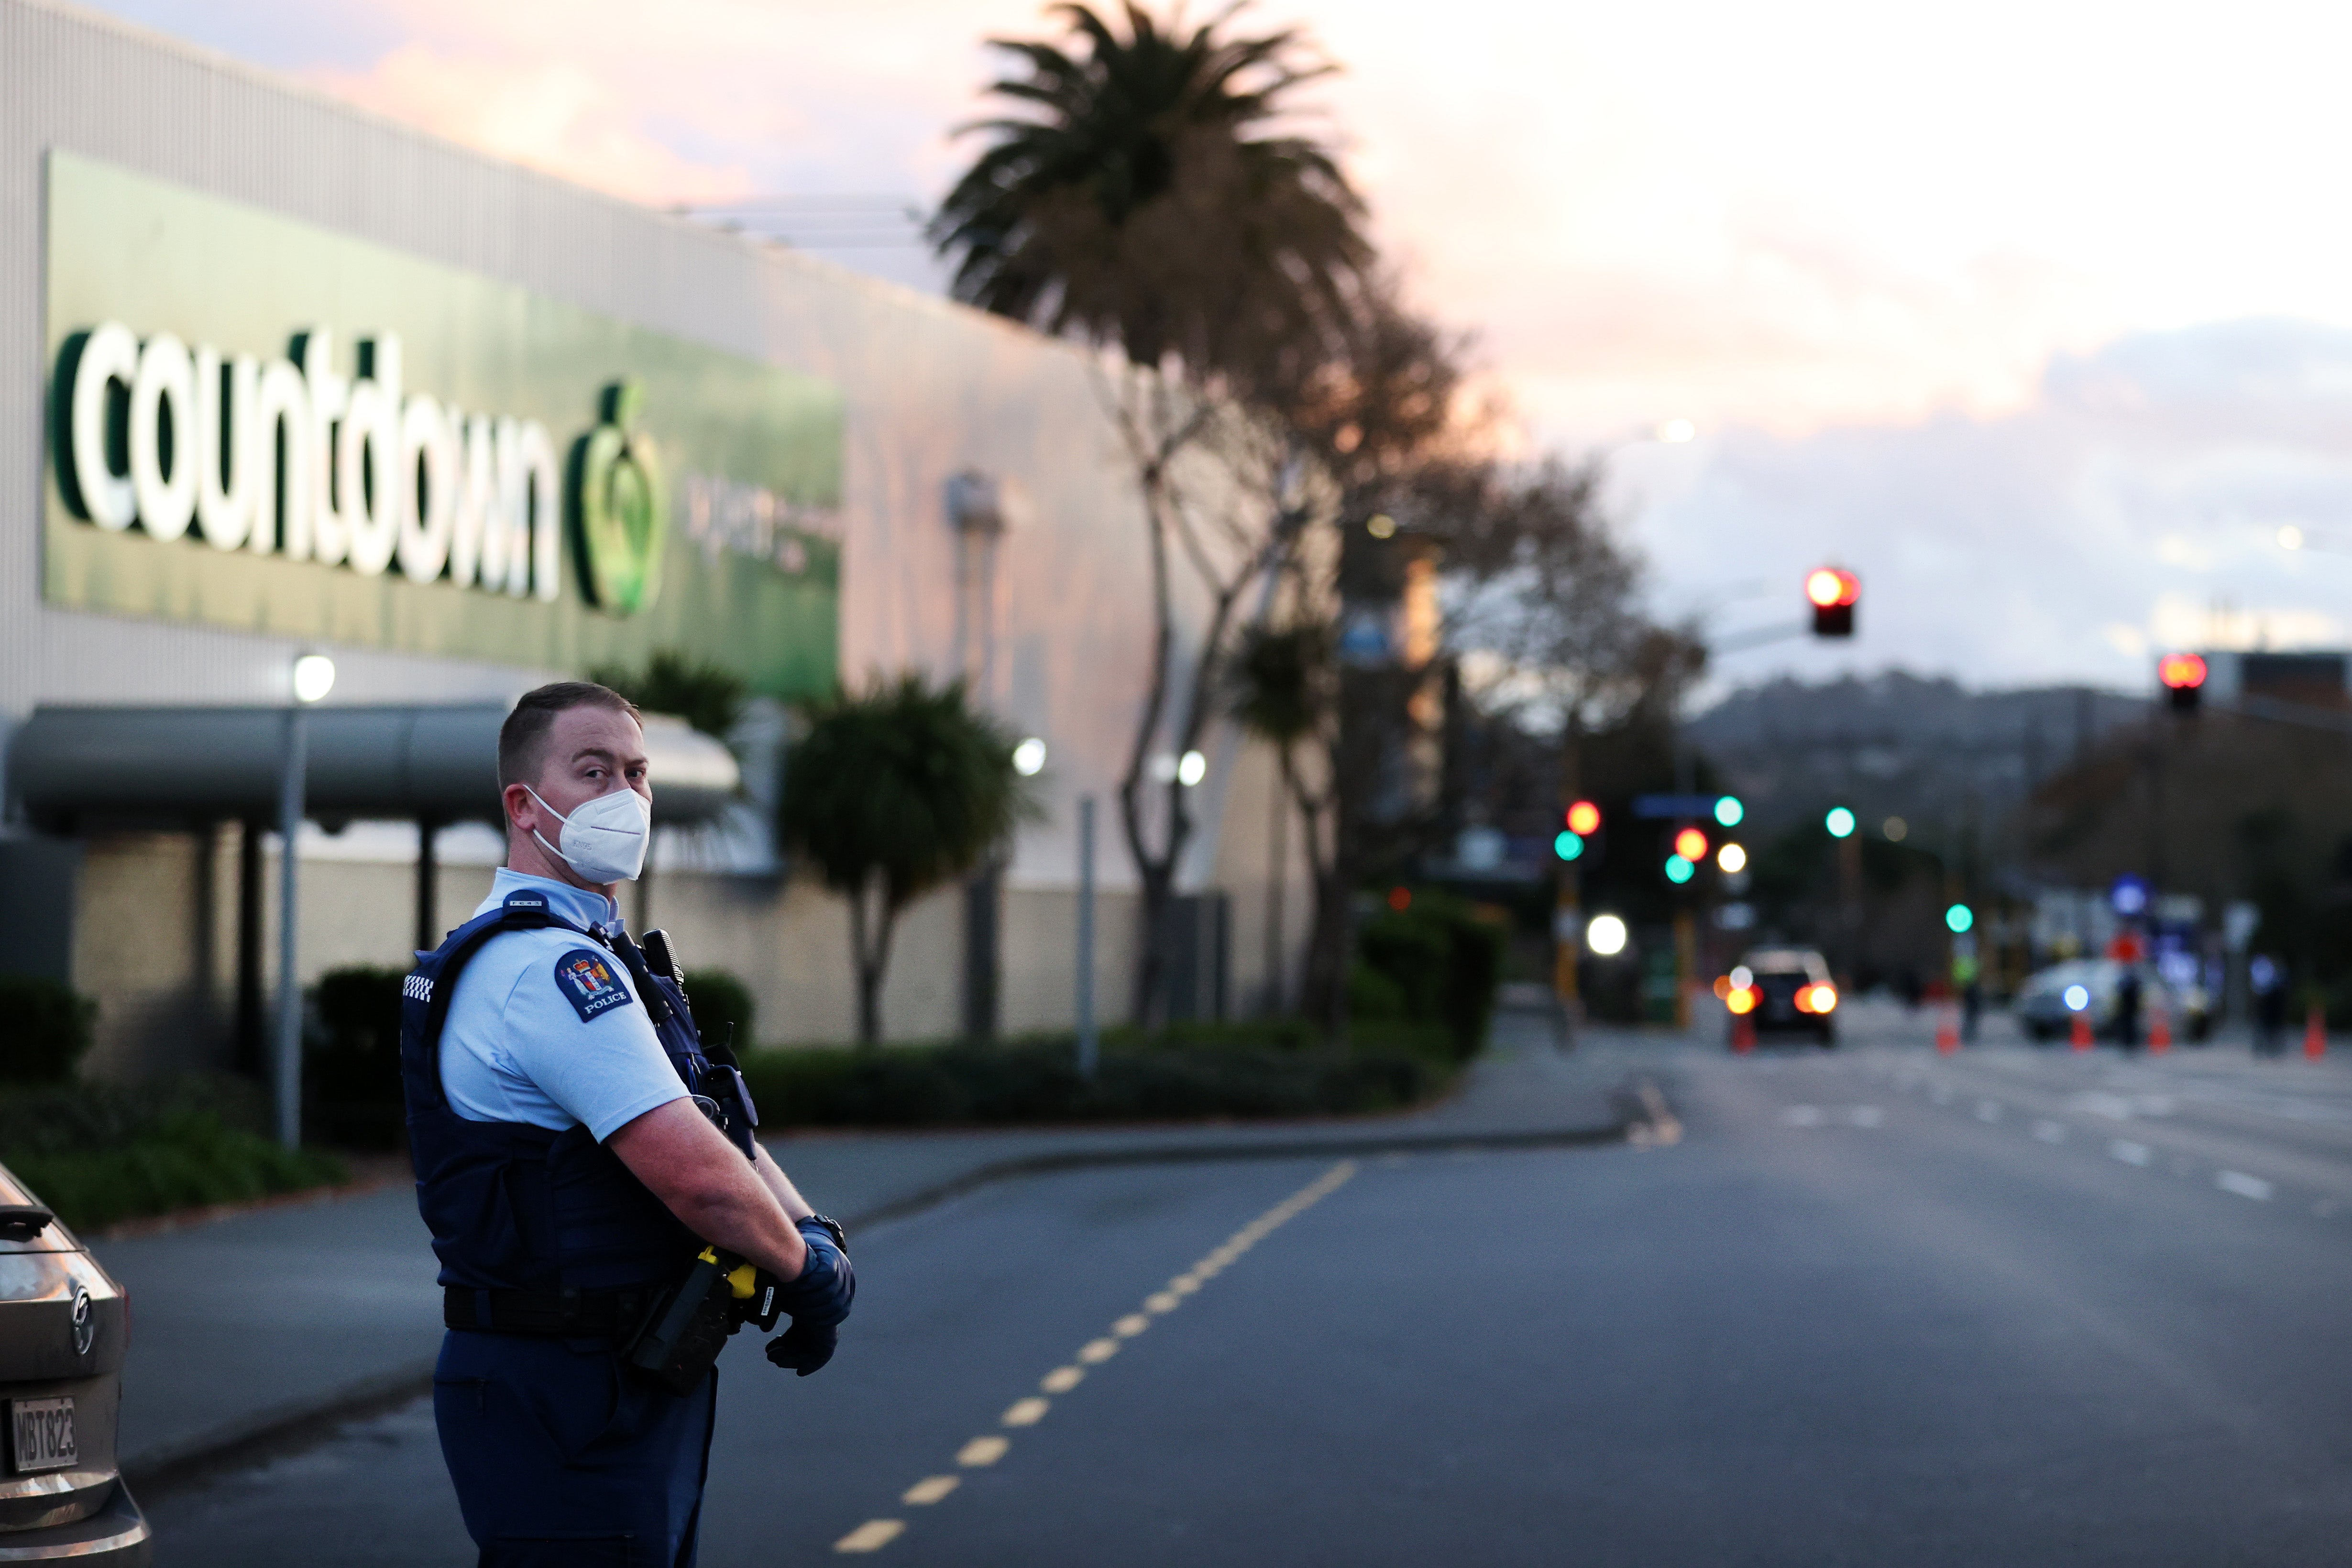 Police guard the area around Countdown mall after a violent extremist took out a terrorist attack stabbing six people before being shot by police on 3 September 2021 in Auckland, New Zealand